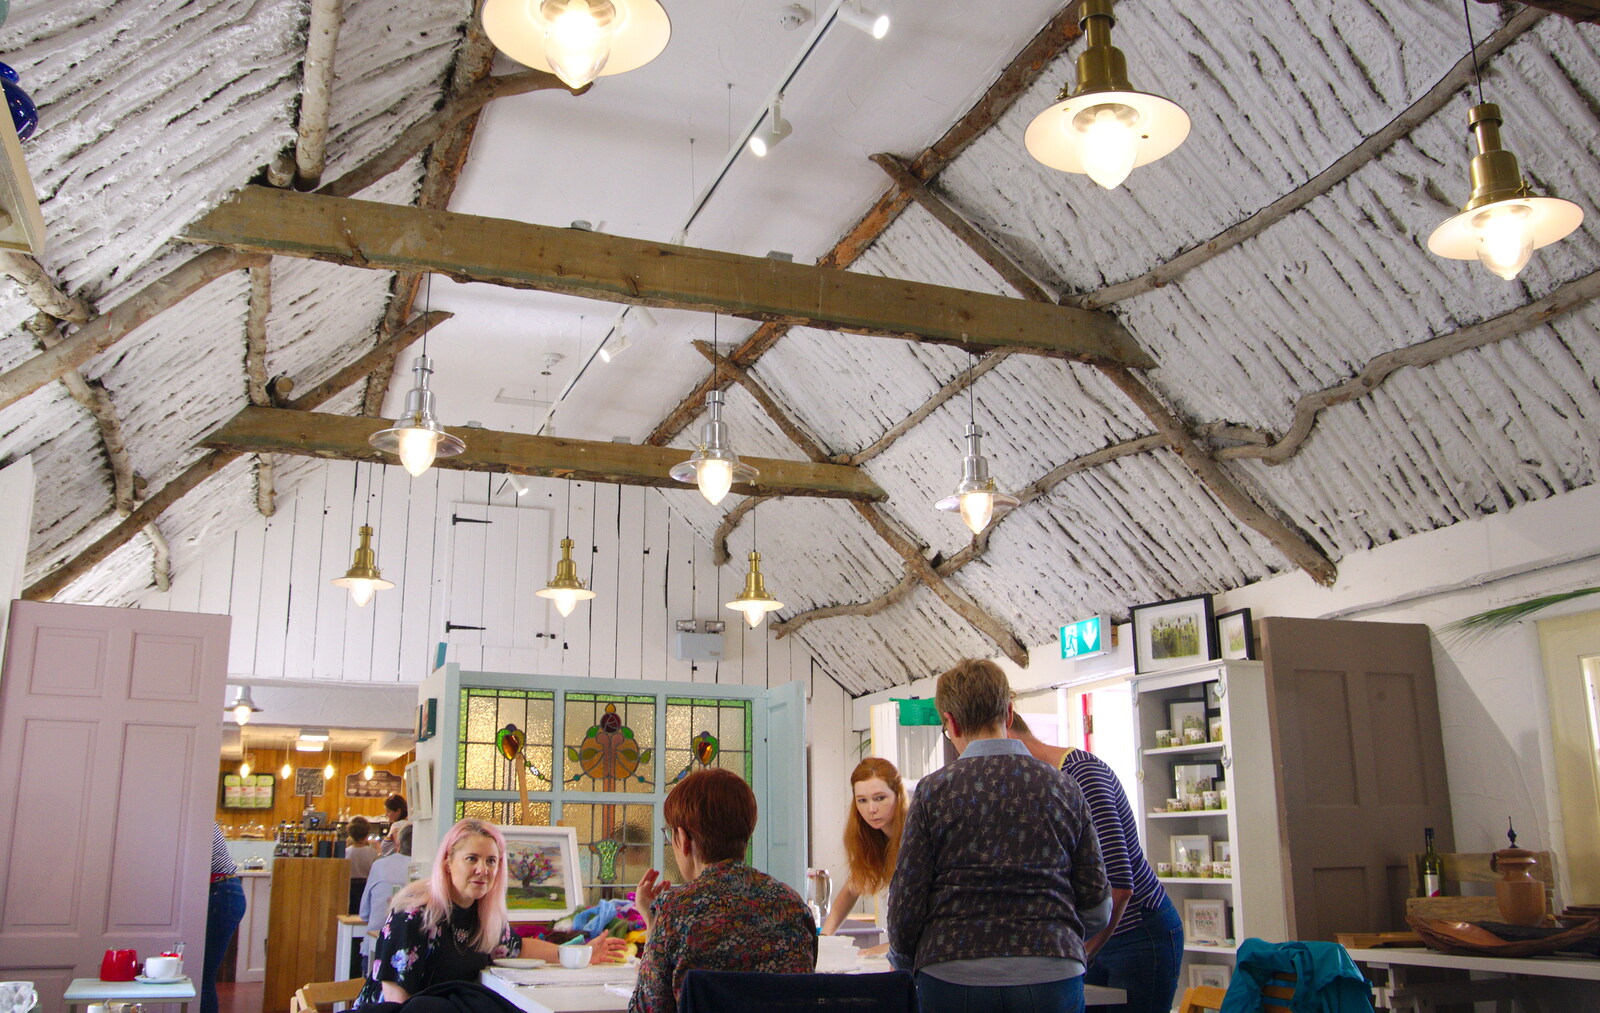 Inside the traditionally-built café in Craft Village from A Day in Derry, County Londonderry, Northern Ireland - 15th August 2019